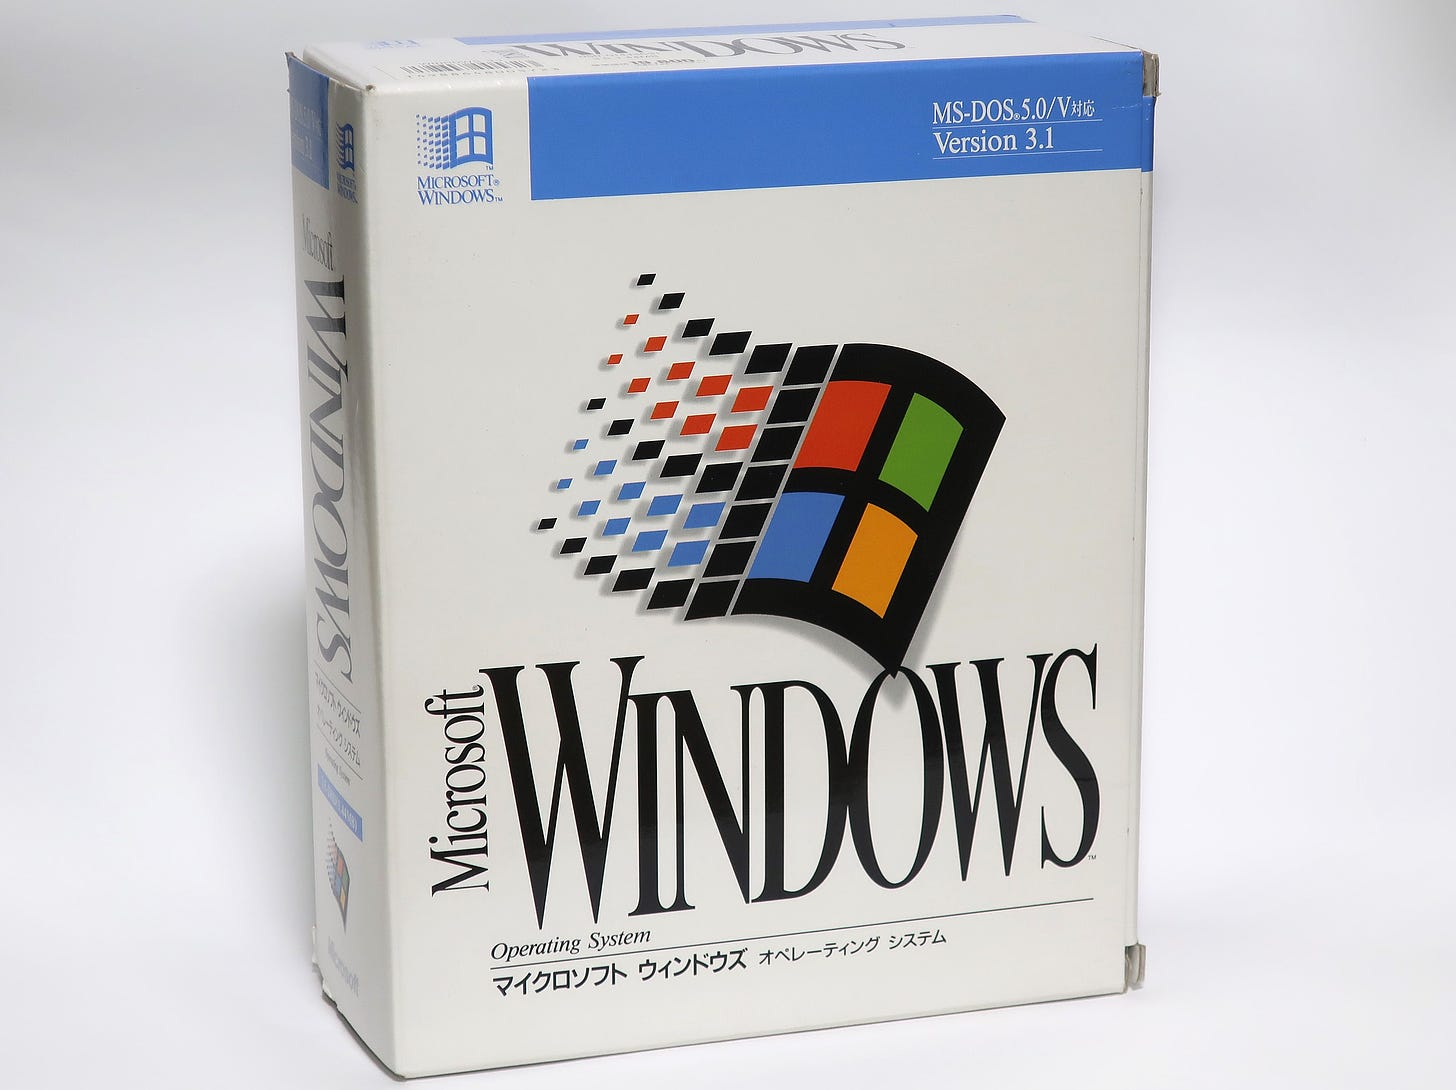 Box of Windows 3.1 featuring DOS/V support.